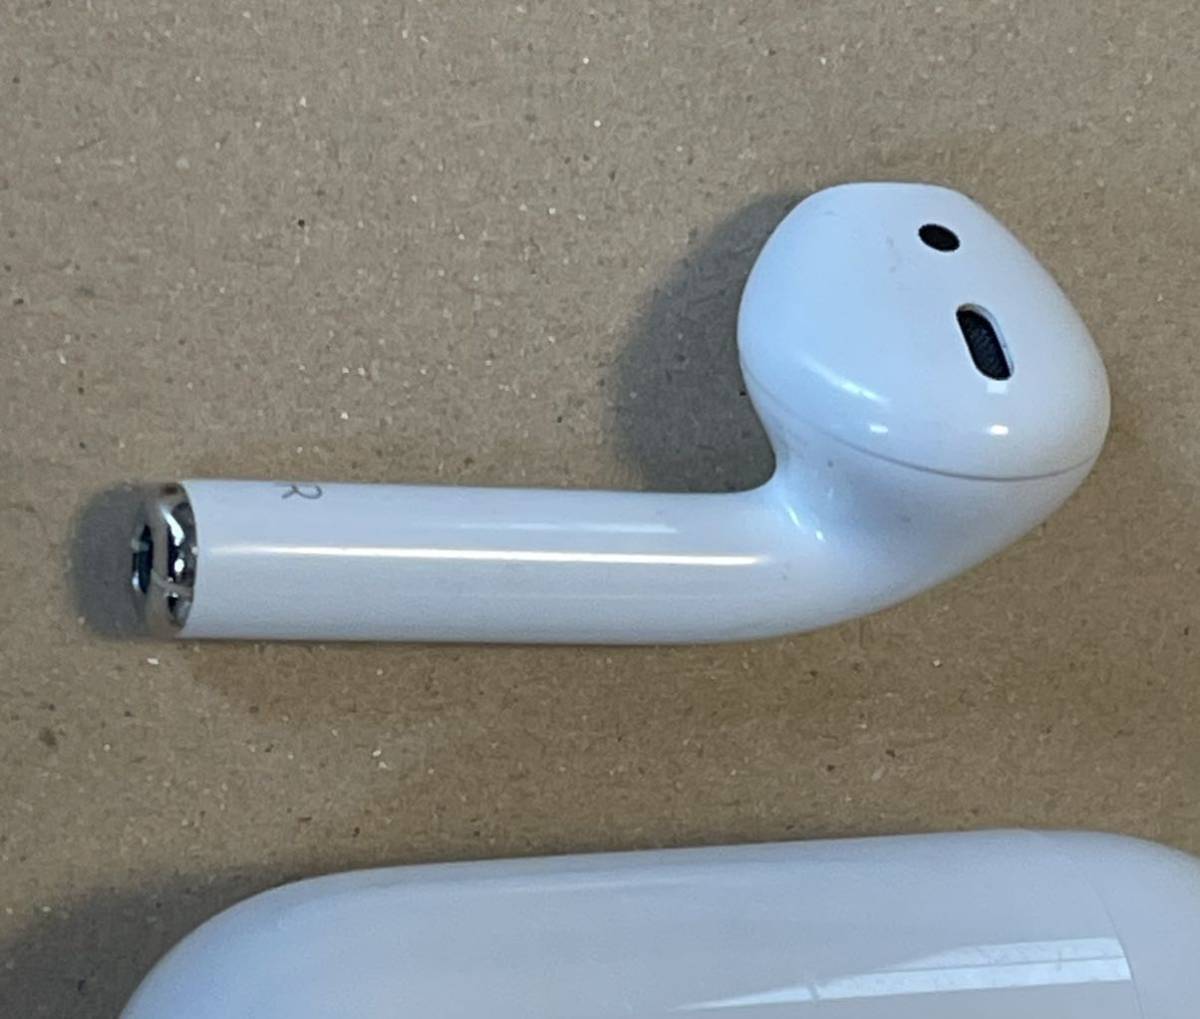 Apple 　AirPods　 第1世代　A1523 　右イヤホンと充電ケース　送料無料　_画像2